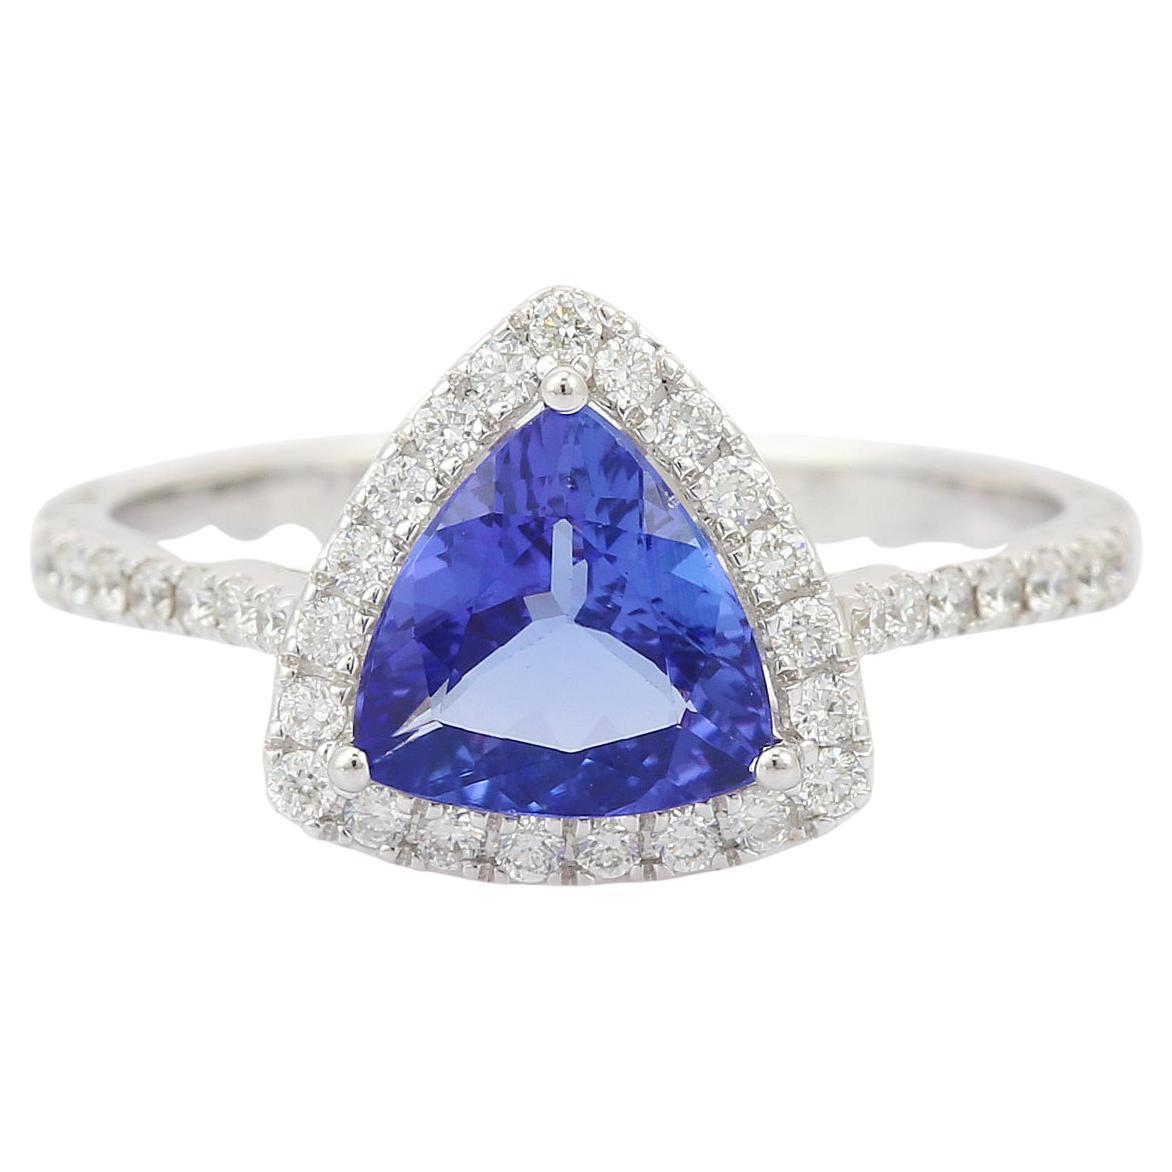 For Sale:  Natural Tanzanite Diamond Engagement Ring in 18k Solid White Gold